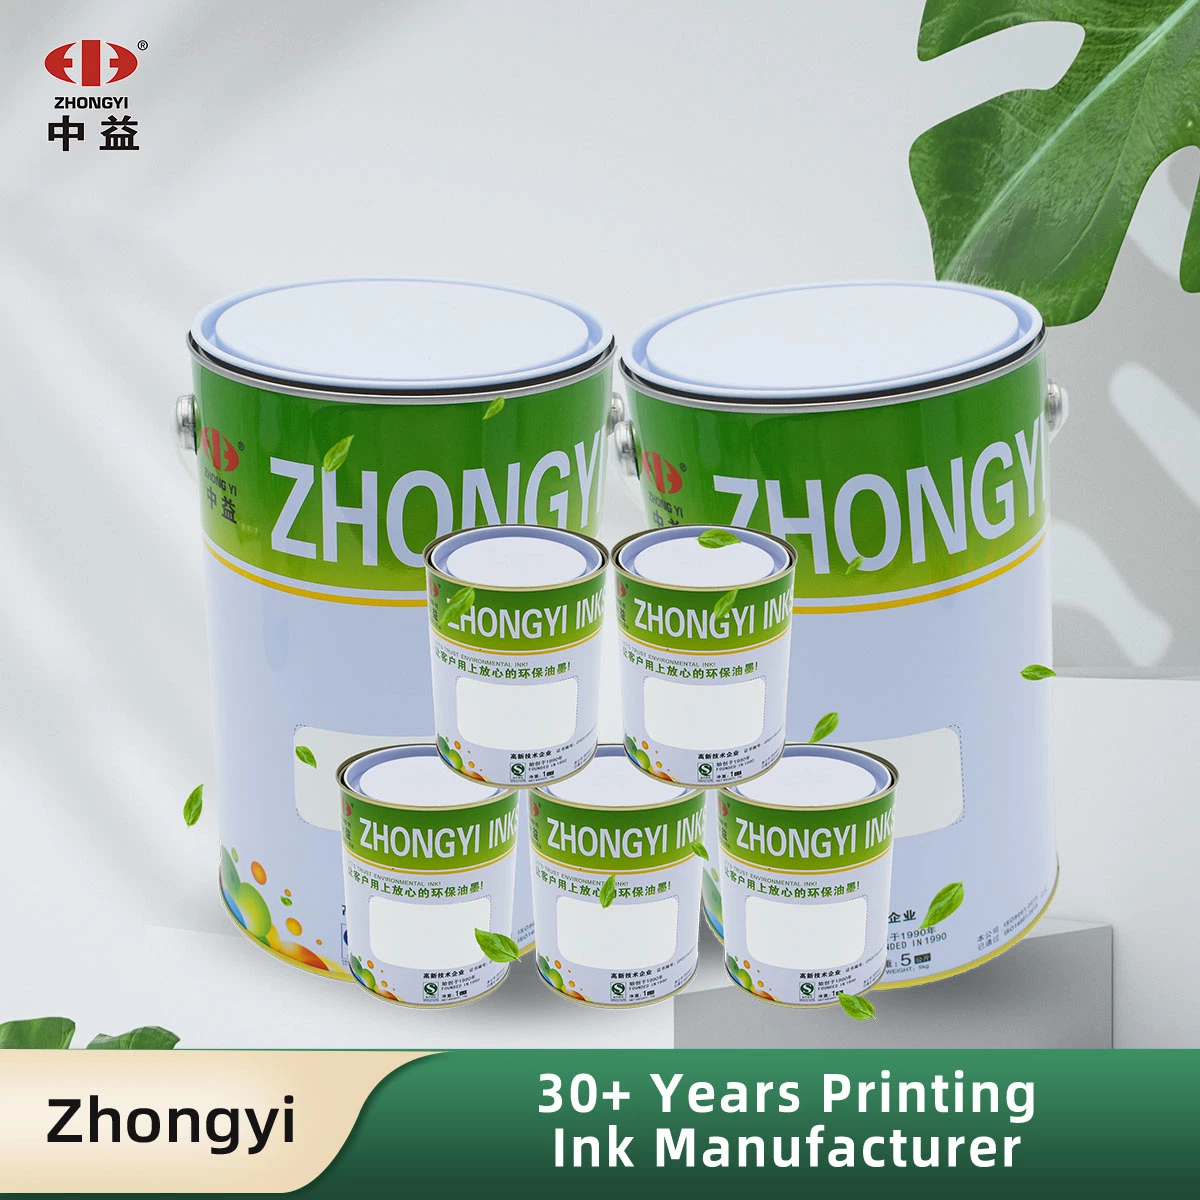 Zhongyi Alcohol-Resistant Sy Series Glossy Screen Printing Ink for ABS, PC, PMMA, PVC and Other Plastic Substrates